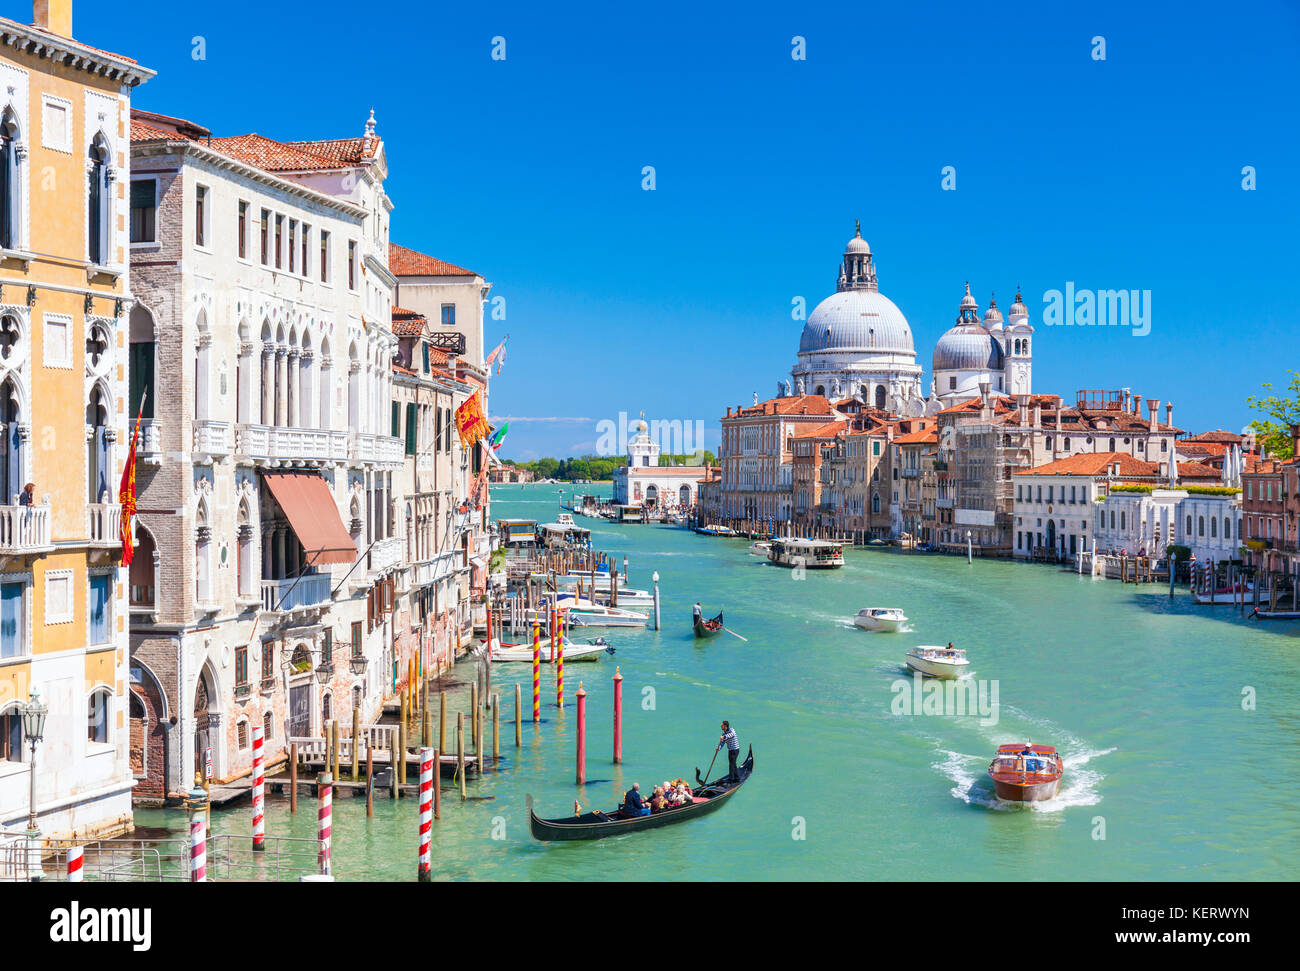 Venice italy venice Vaporettos actv water taxi or water bus and other small motor boats in Venice on the Grand Canal Venice Italy EU Europe Stock Photo